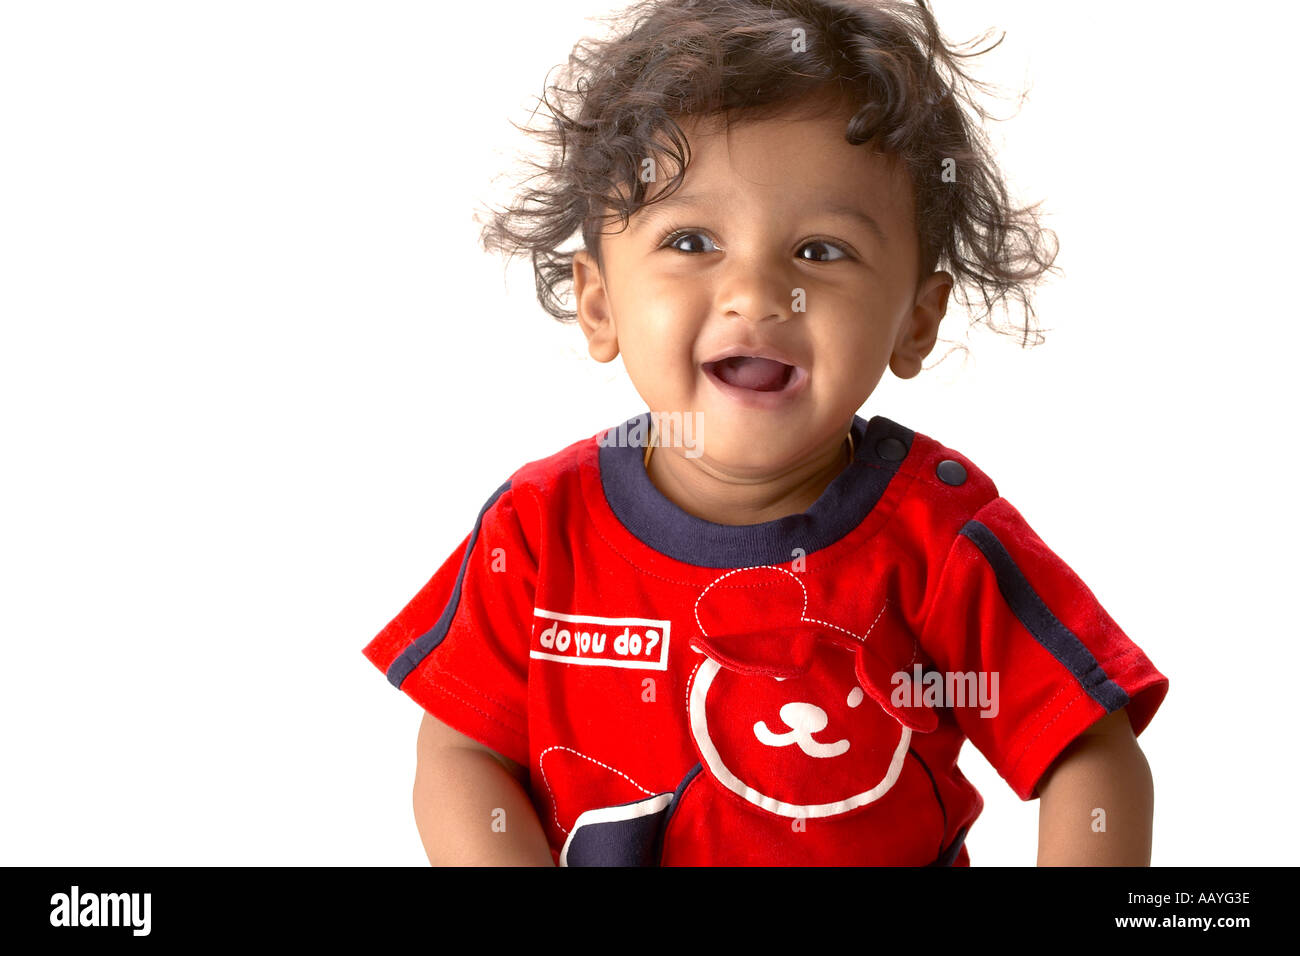 Asian Indian ten months boy wearing red T shirt looking towards camera on white background Stock Photo